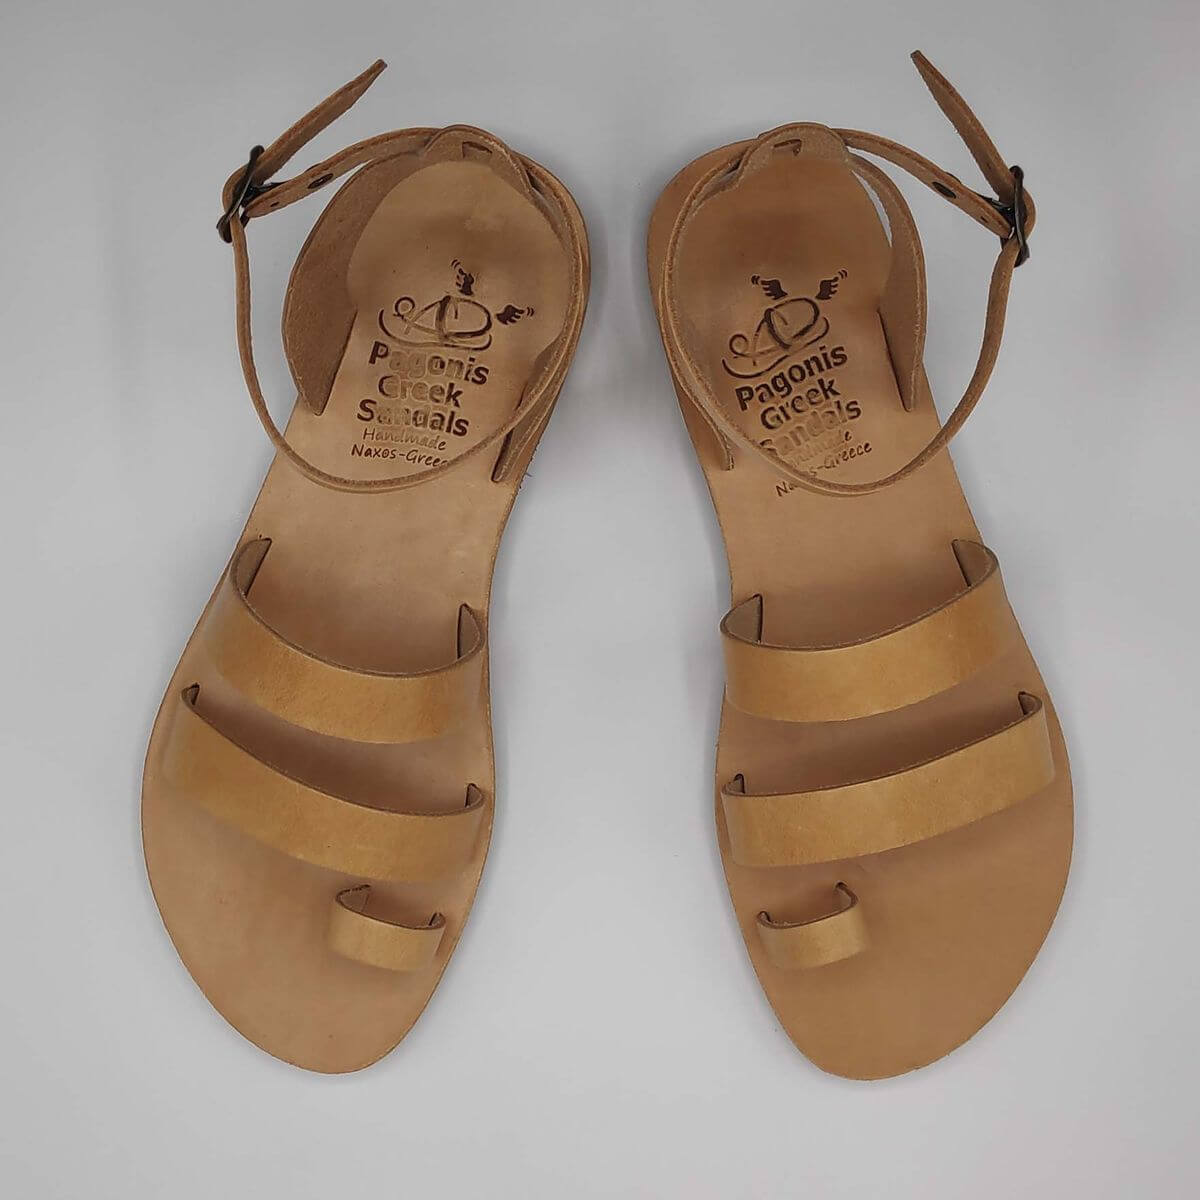 Natural Tan leather dressy sandals with two straps, toe ring and high ankle strap, top view